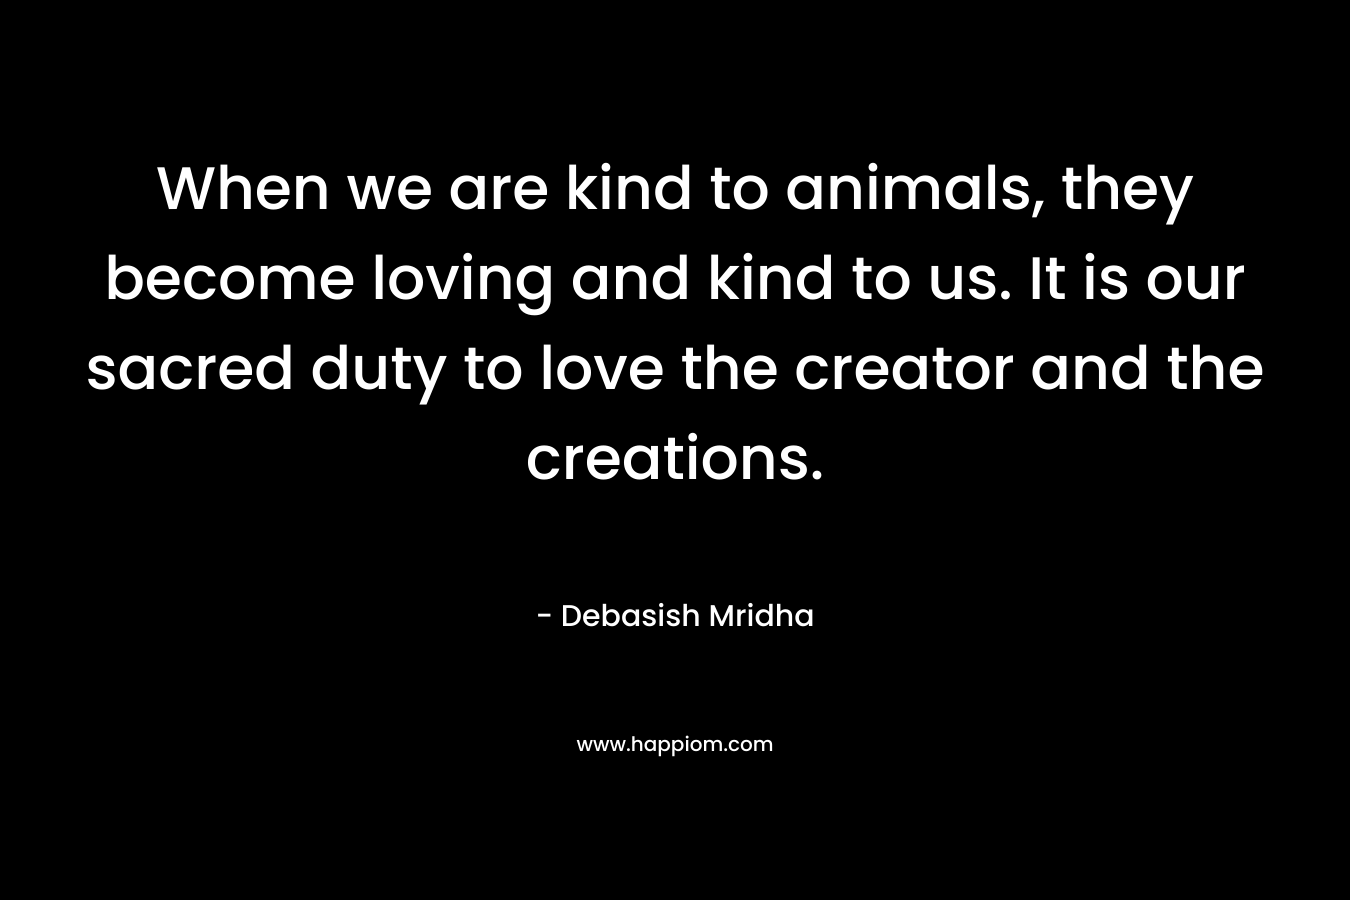 When we are kind to animals, they become loving and kind to us. It is our sacred duty to love the creator and the creations.